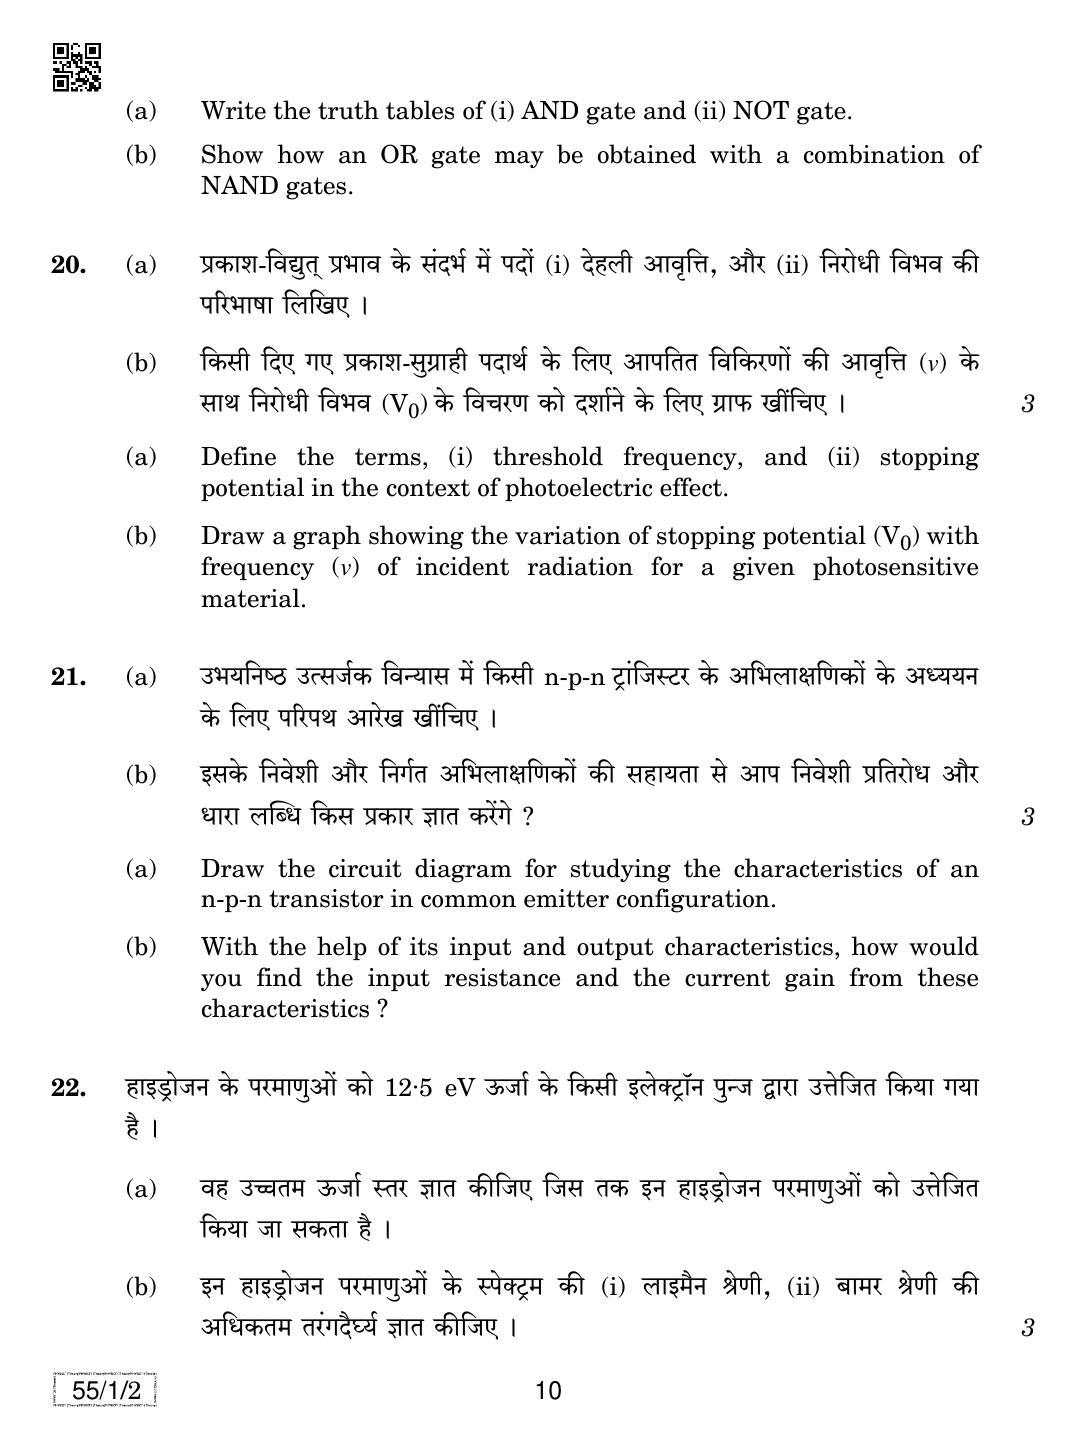 CBSE Class 12 55-1-2 PHYSICS 2019 Compartment Question Paper - Page 10